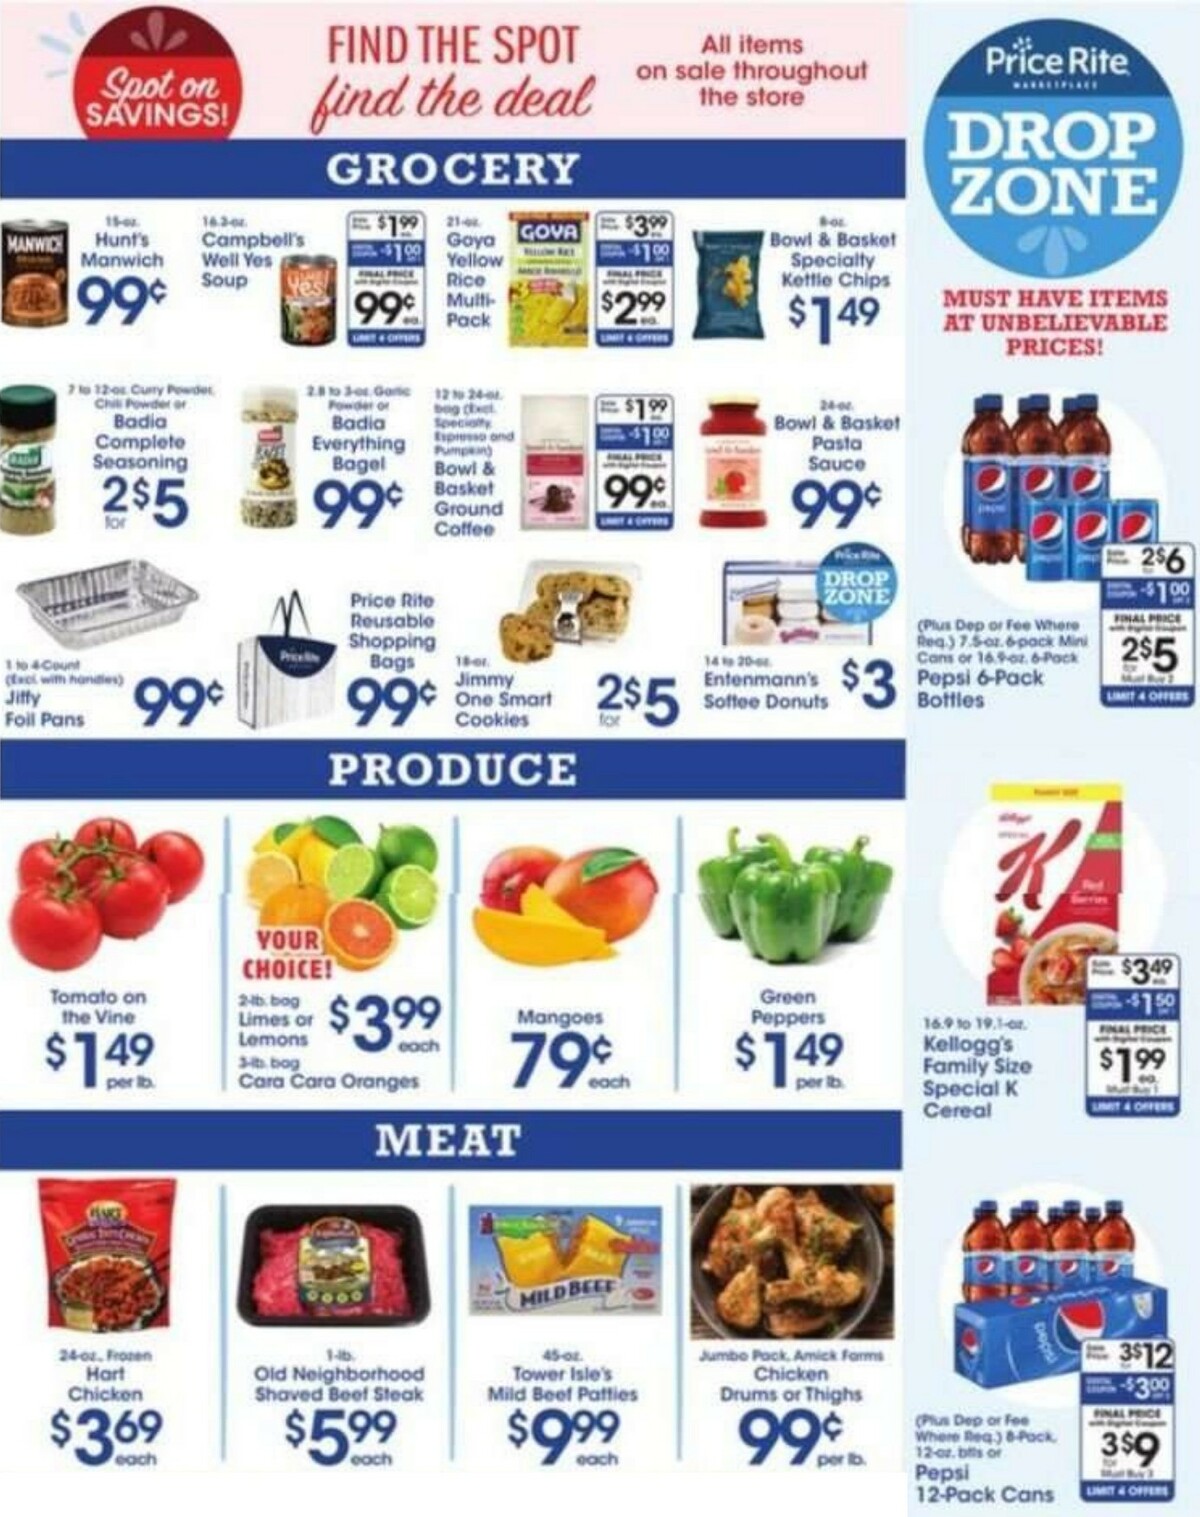 Price Rite Weekly Ad from January 22